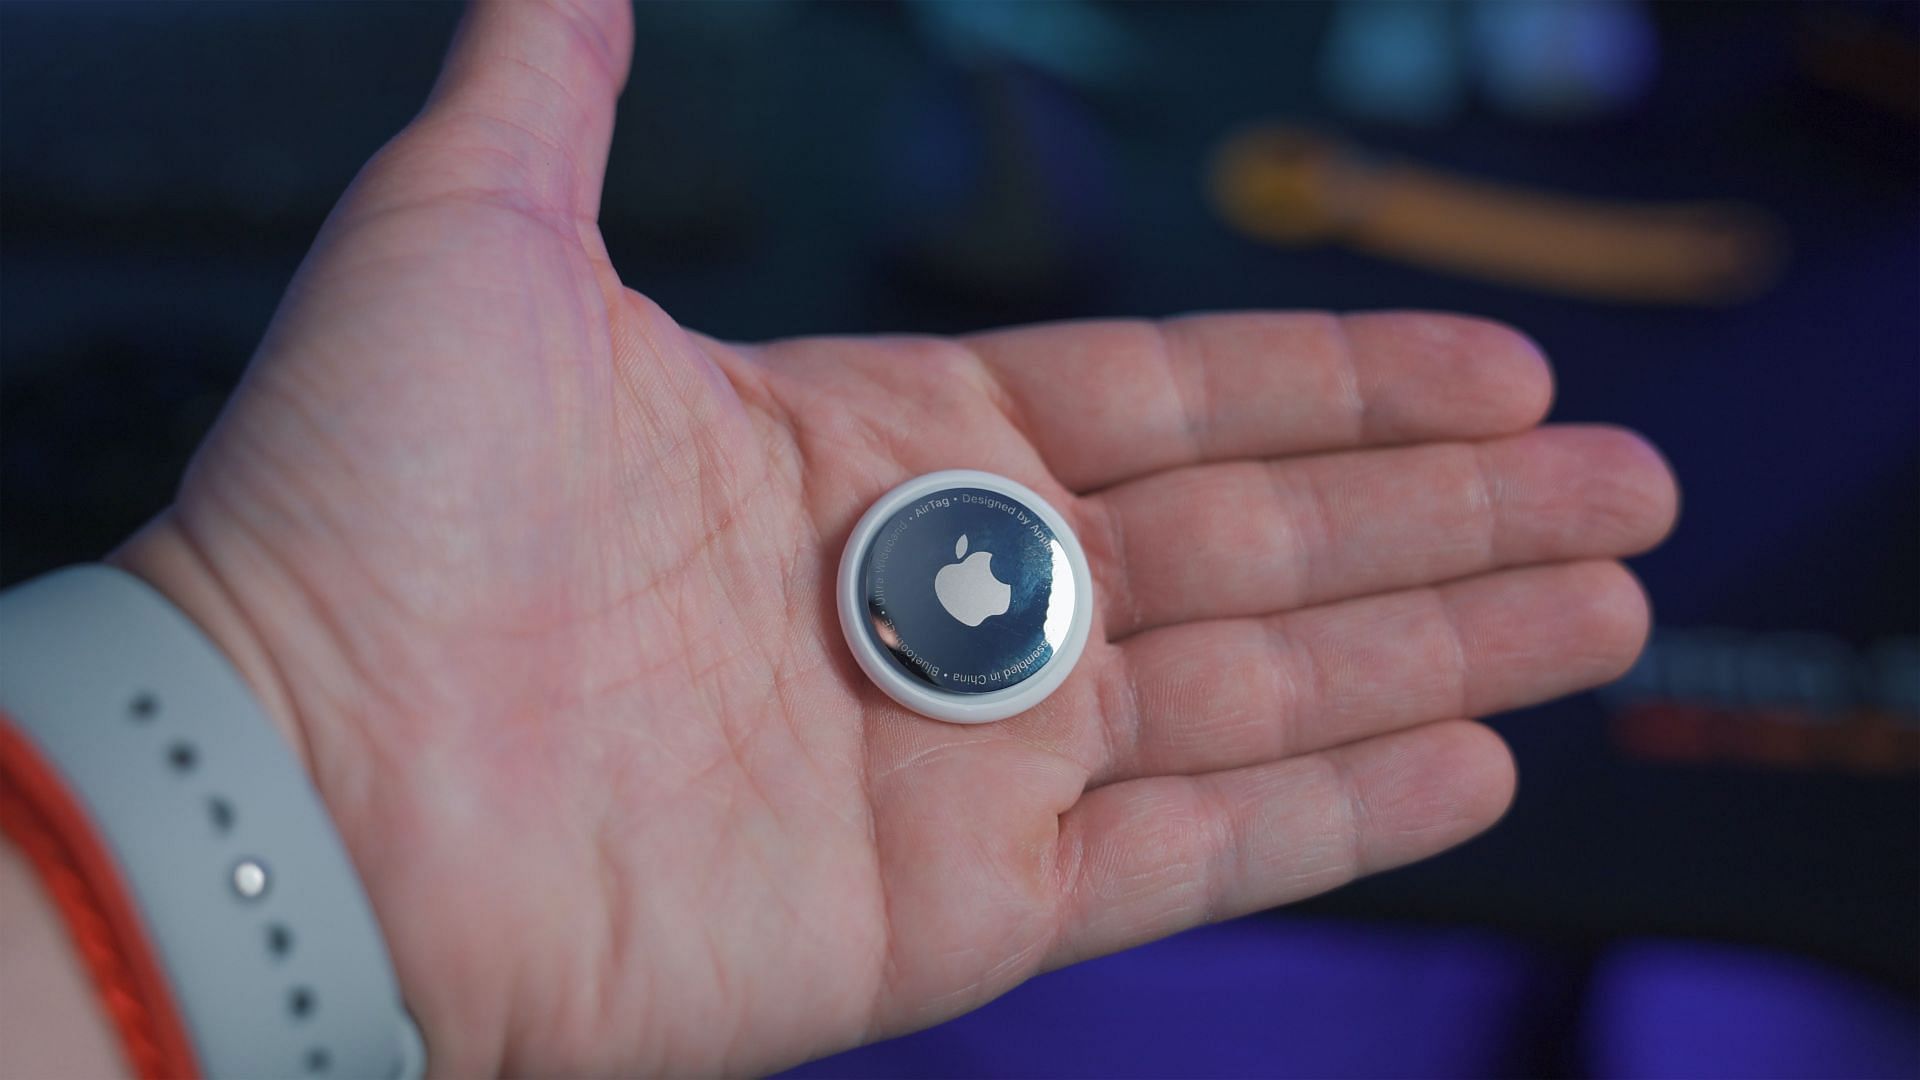 Google found to be developing Apple AirTag competitor with UWB